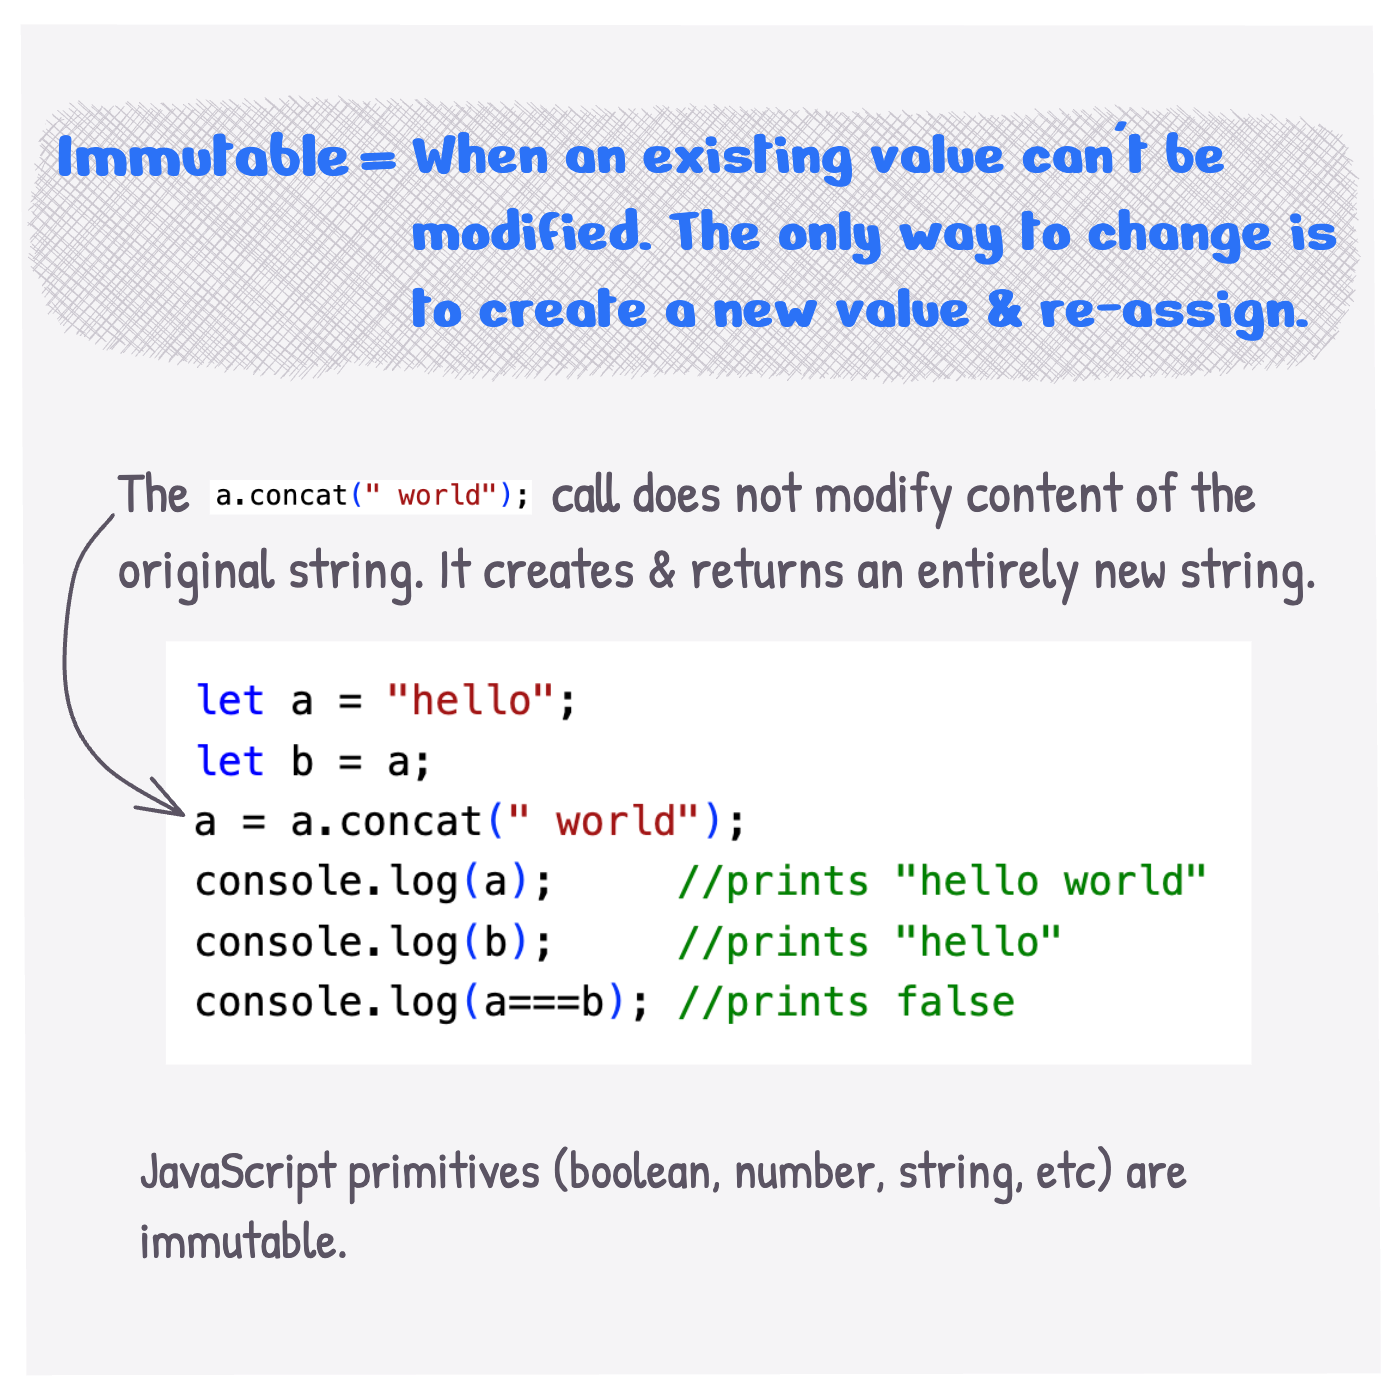 Immutable = when an existing value can't be modified. The only way to change is to create a new value and re-assign. JavaScript primitives like boolean and string are immutable.